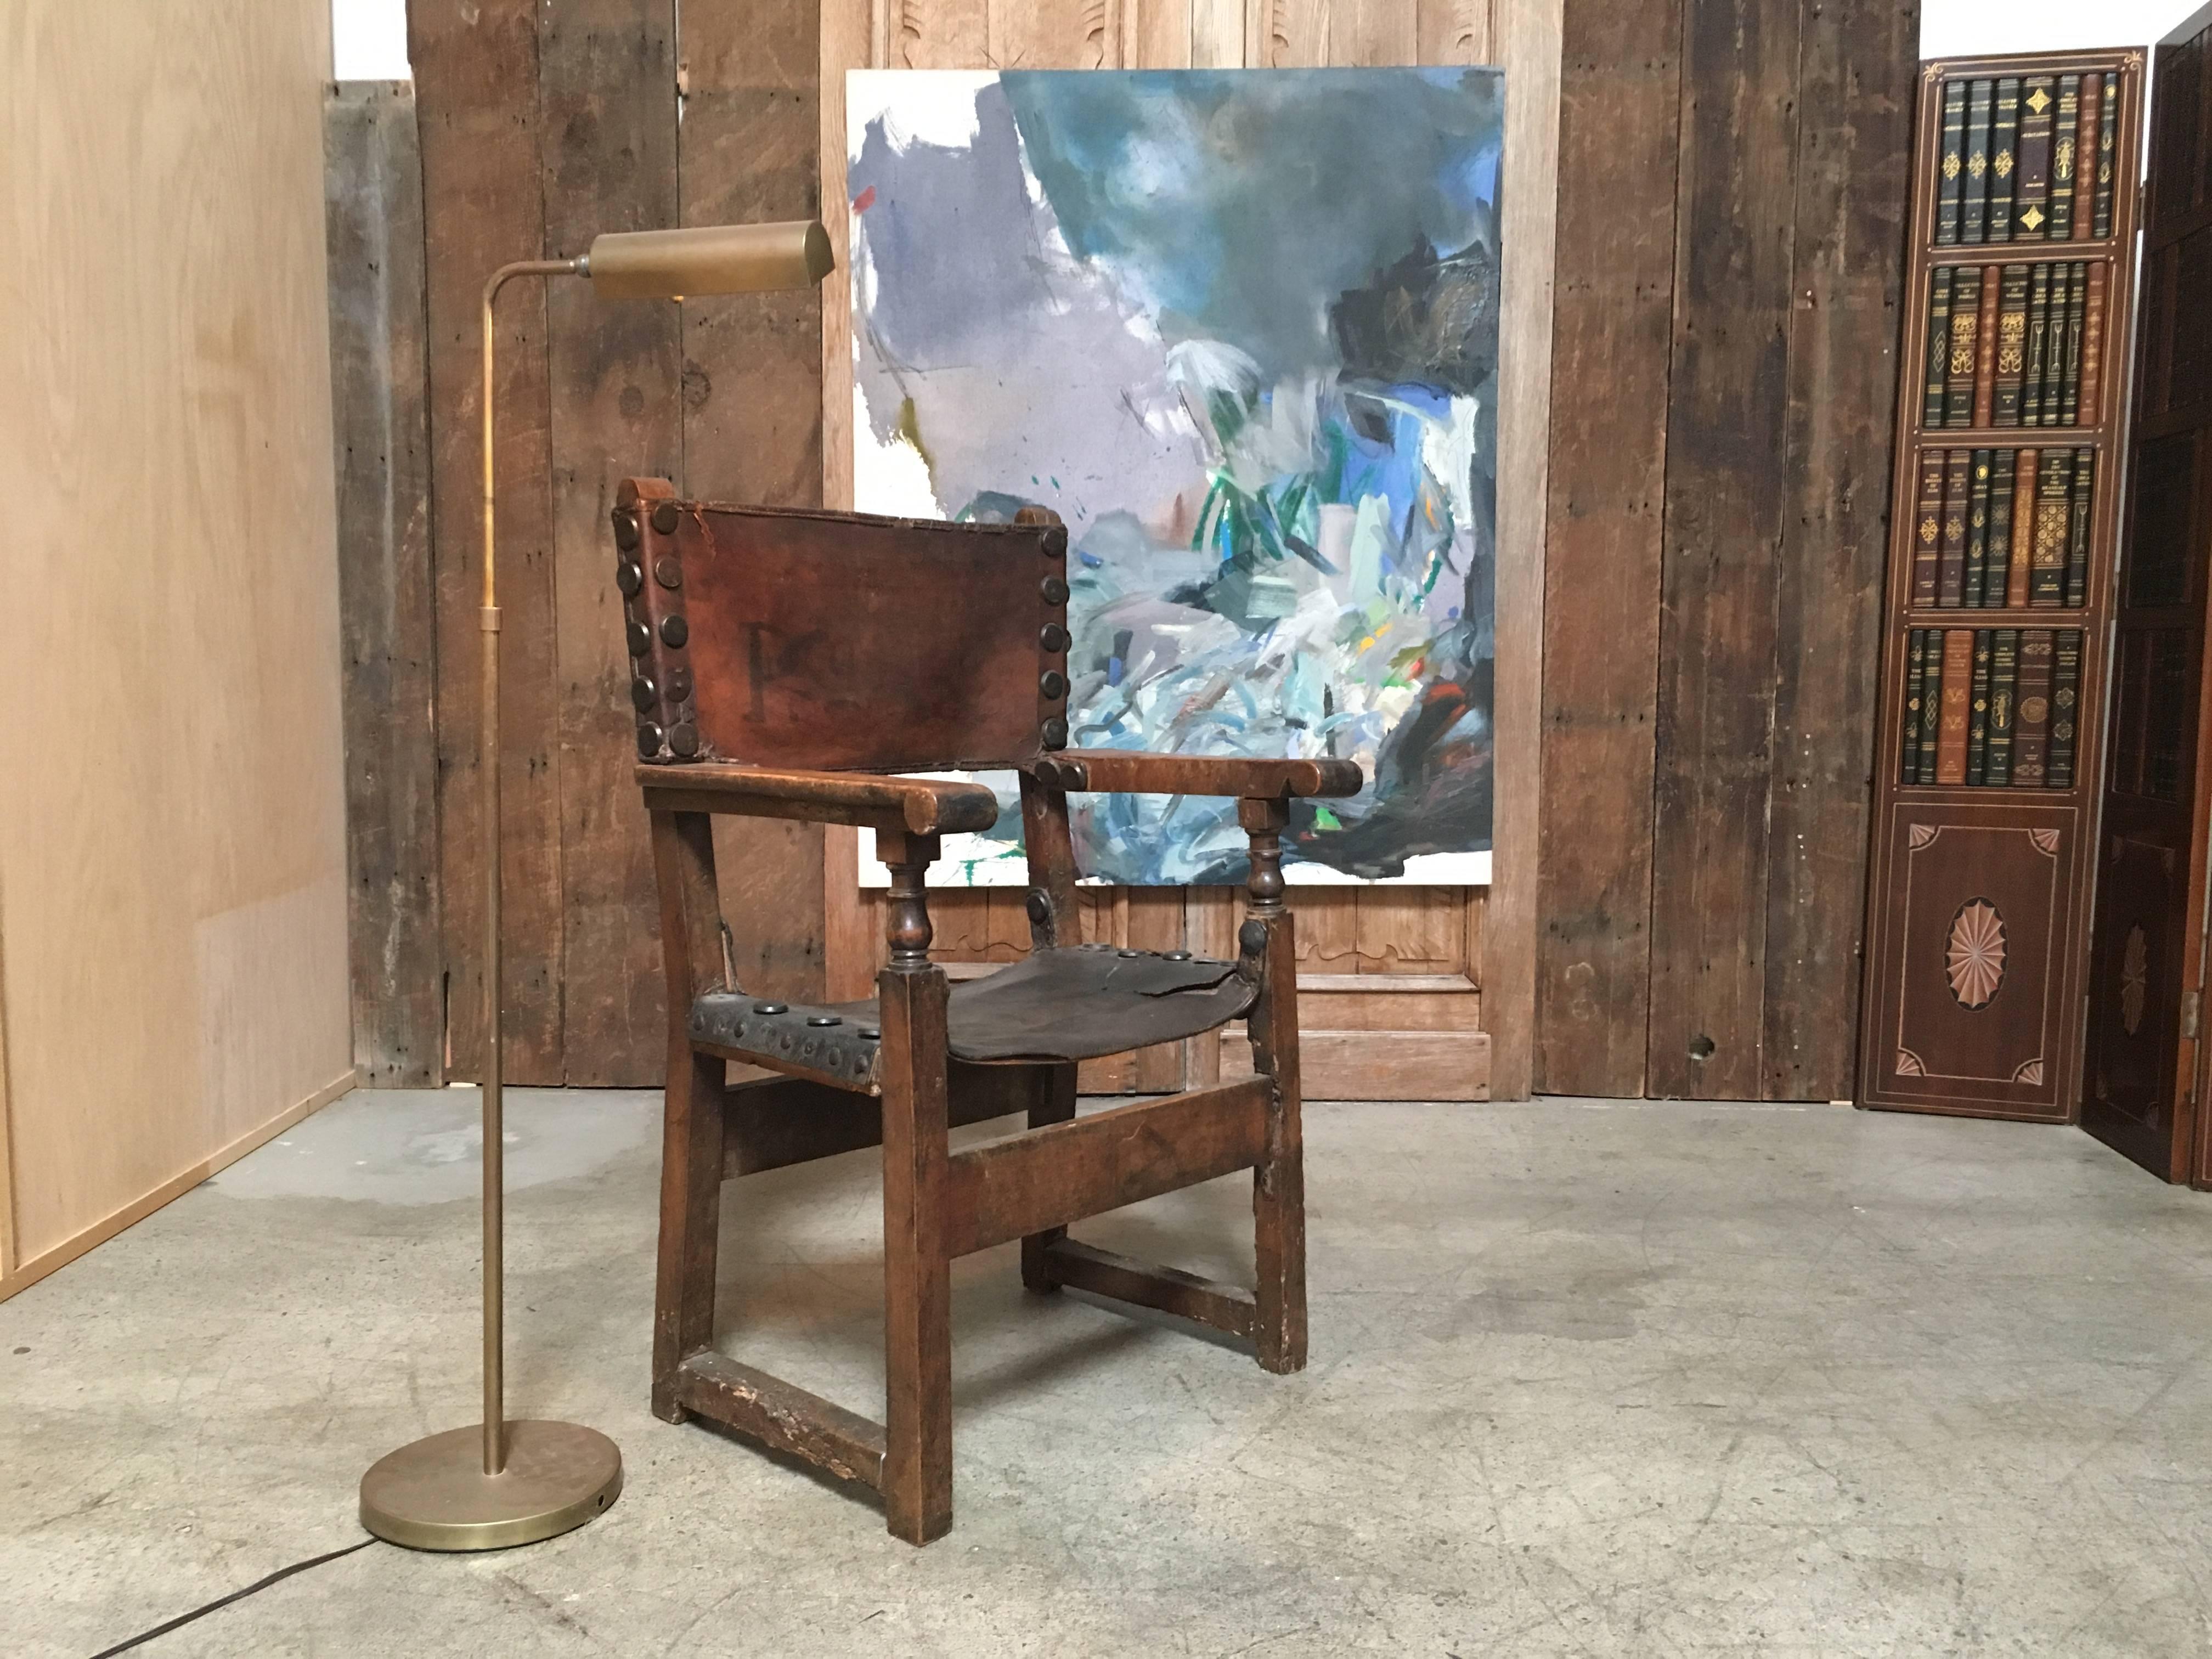 This chair has wonderful distressed patina of the leather and the wood perfect for a Tuscan, French or Spanish style home.